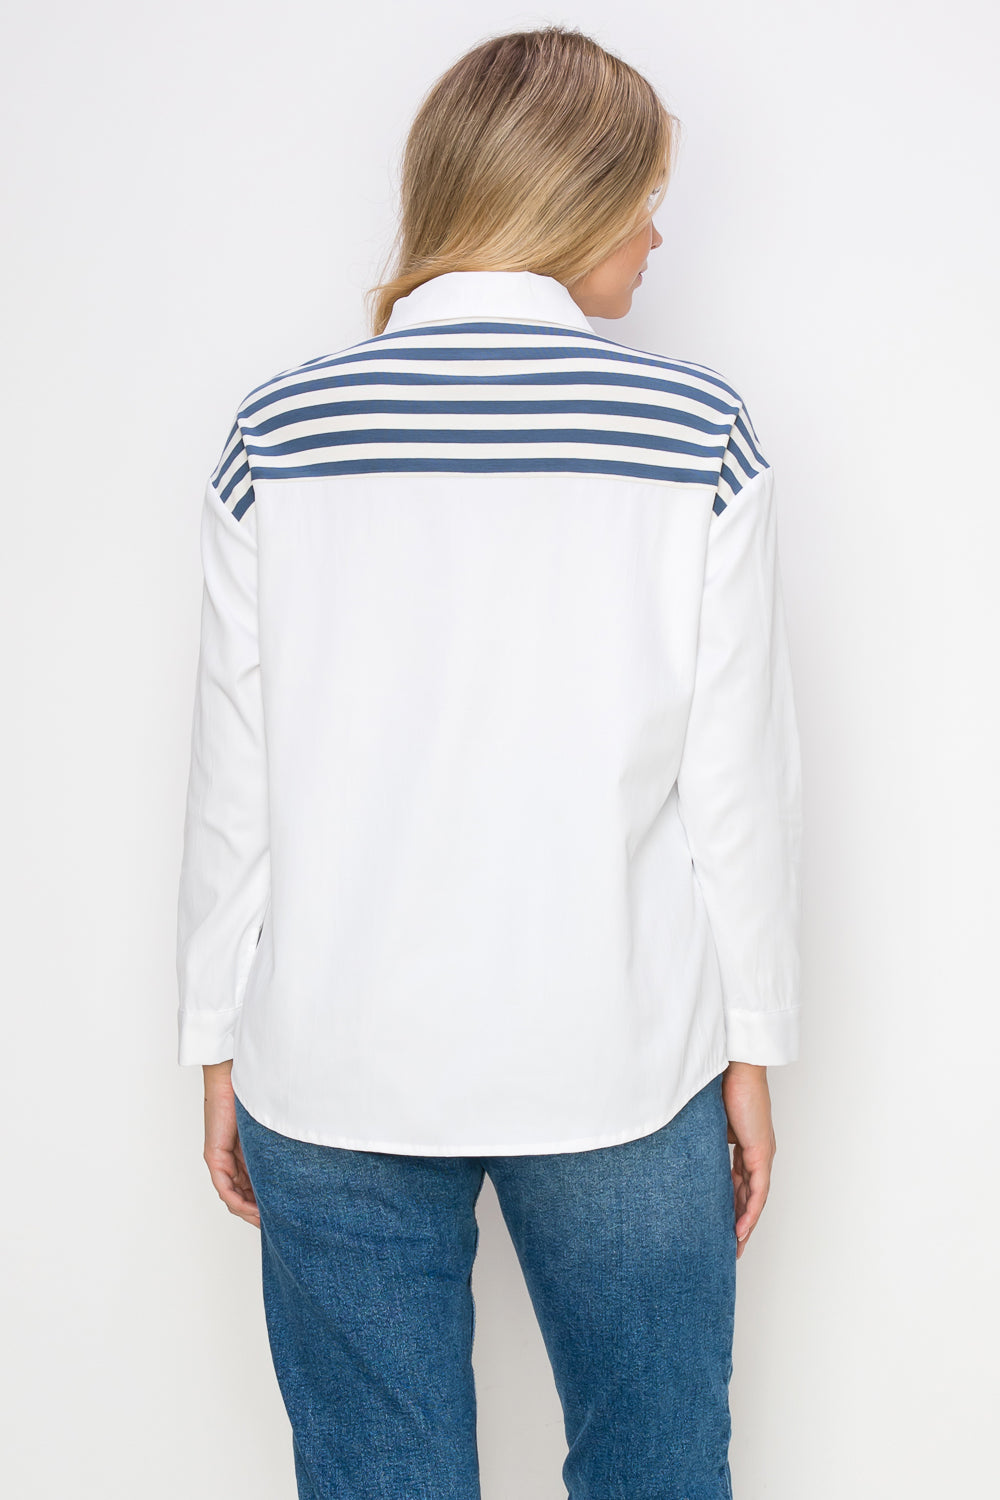 Willette Top with Stripe Front Ties